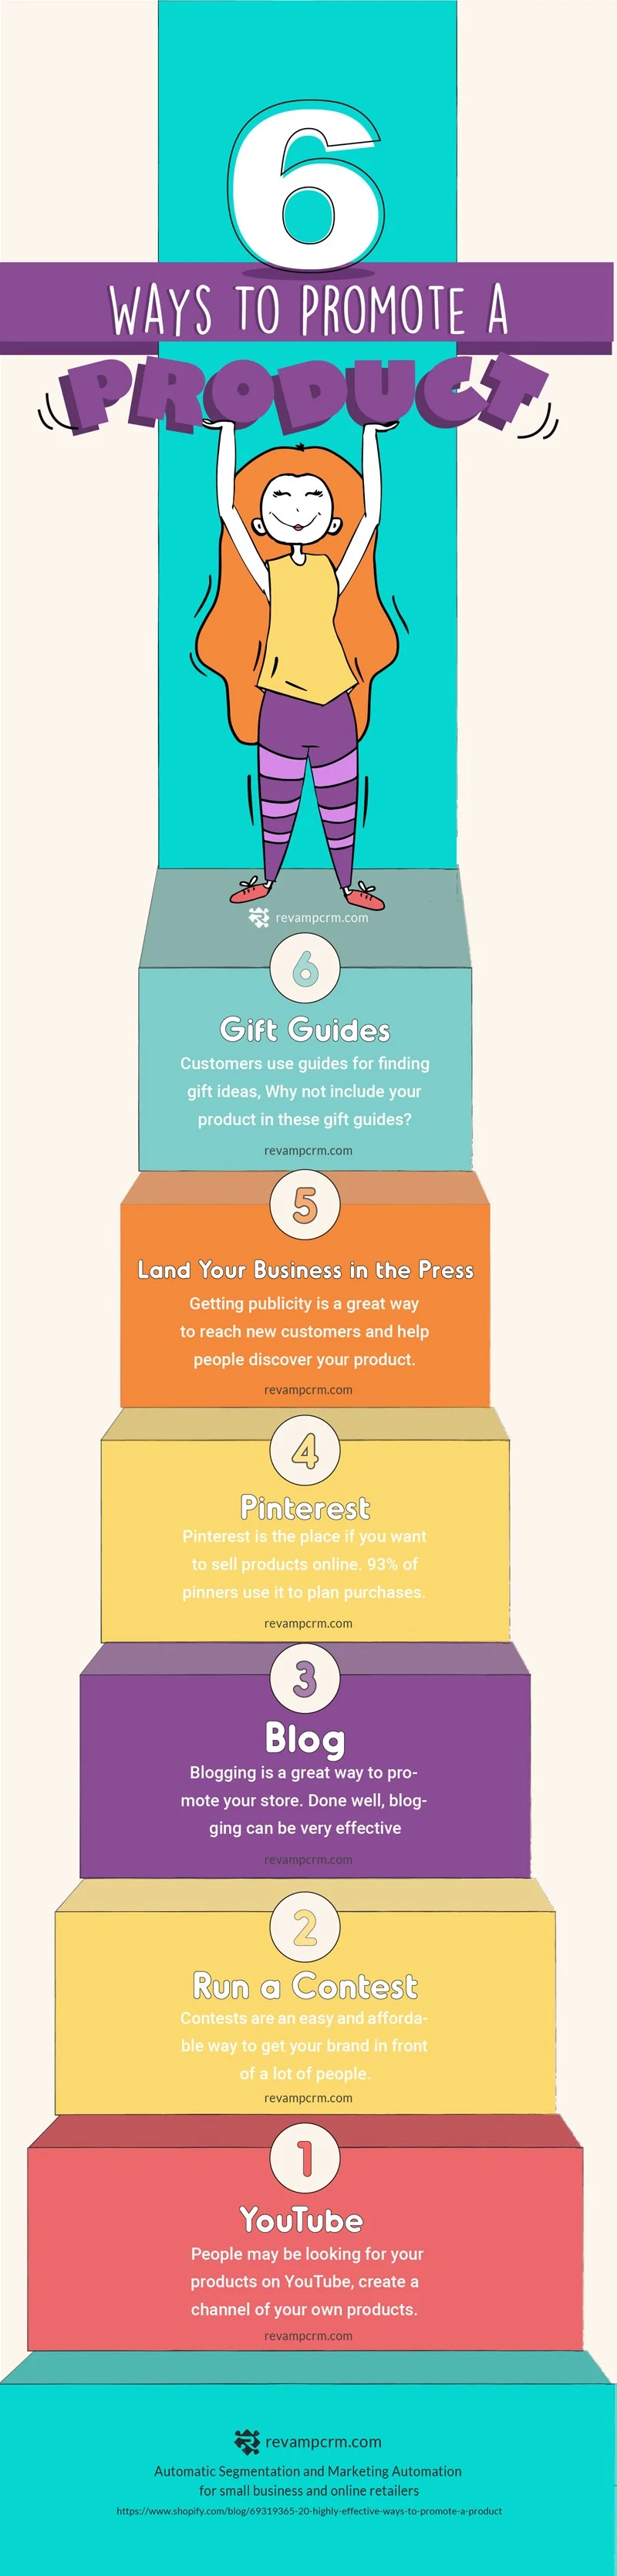 6 Ways to Promote your Online Store Products - #Infographic